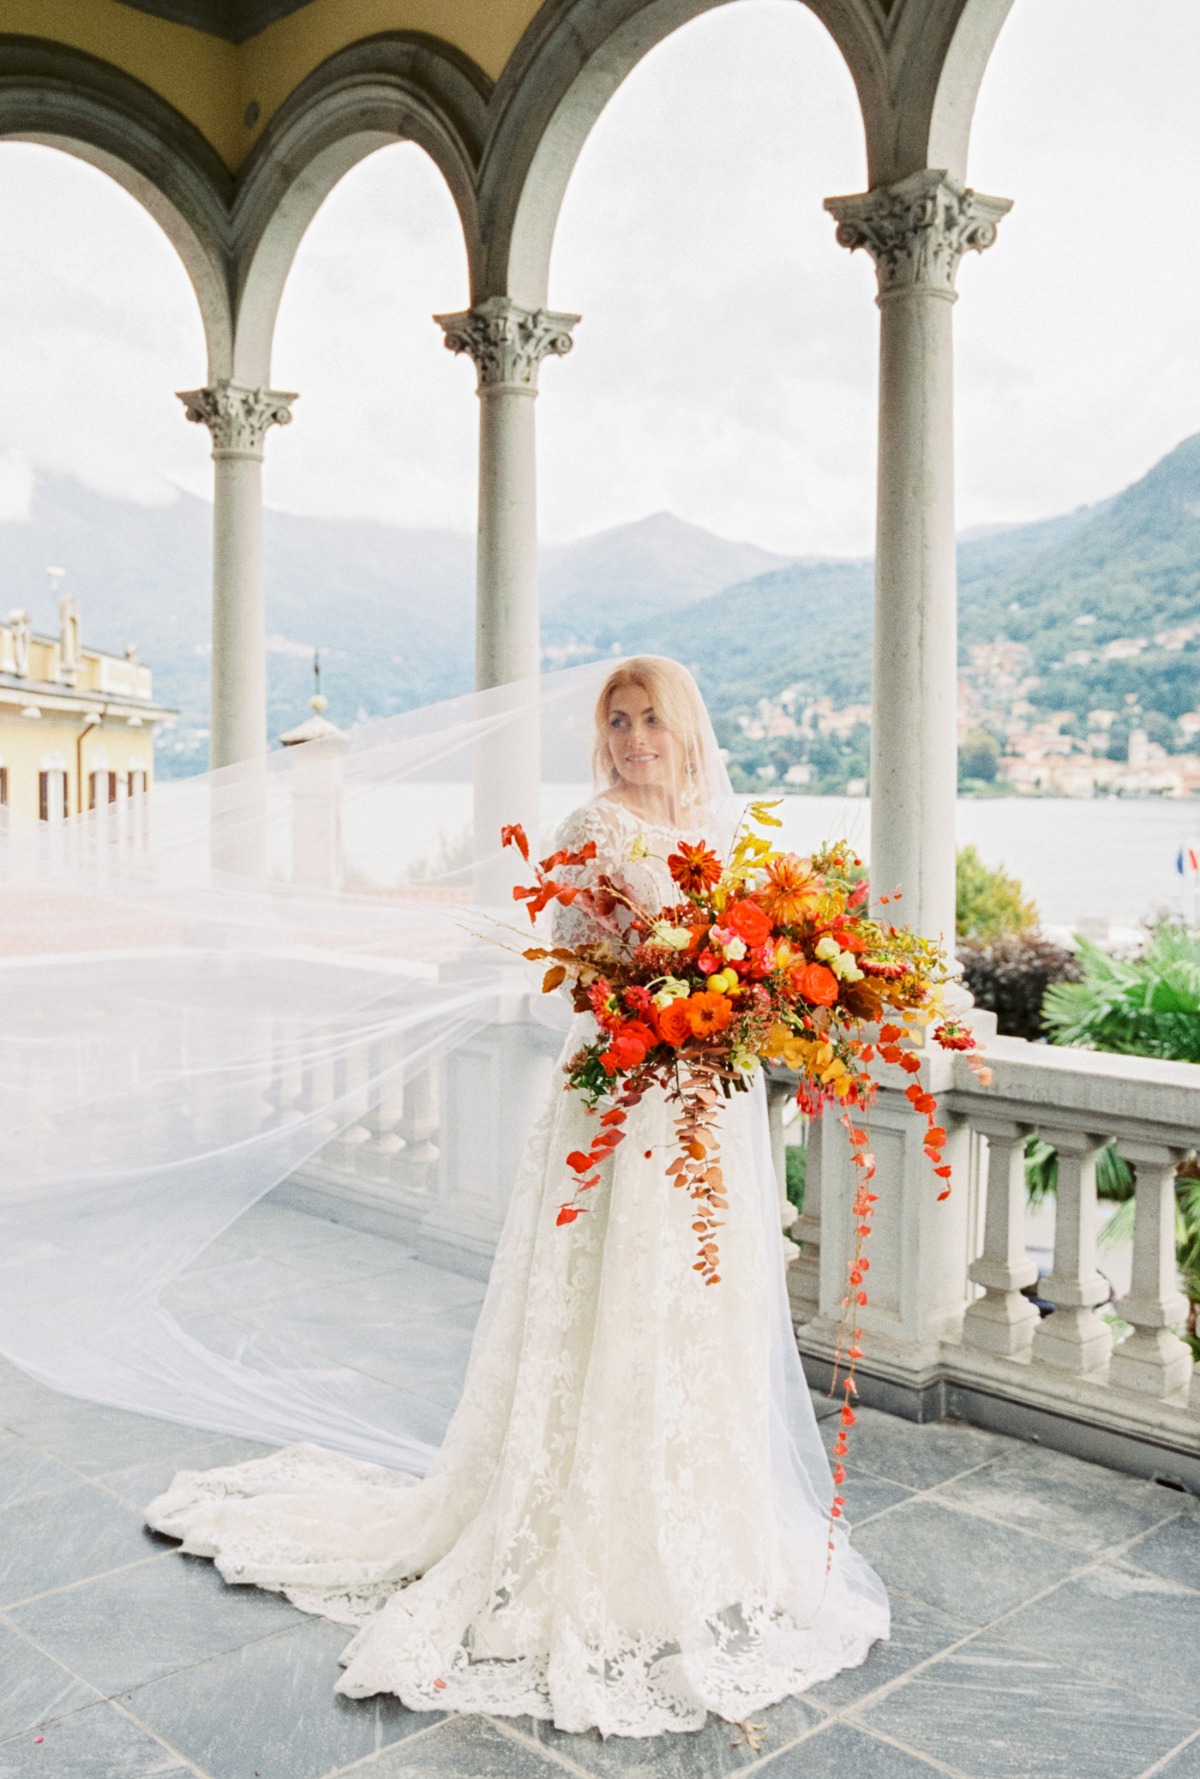 The Bride Wore Red Velvet Shoes for Her Fall Wedding Day on Lake Como